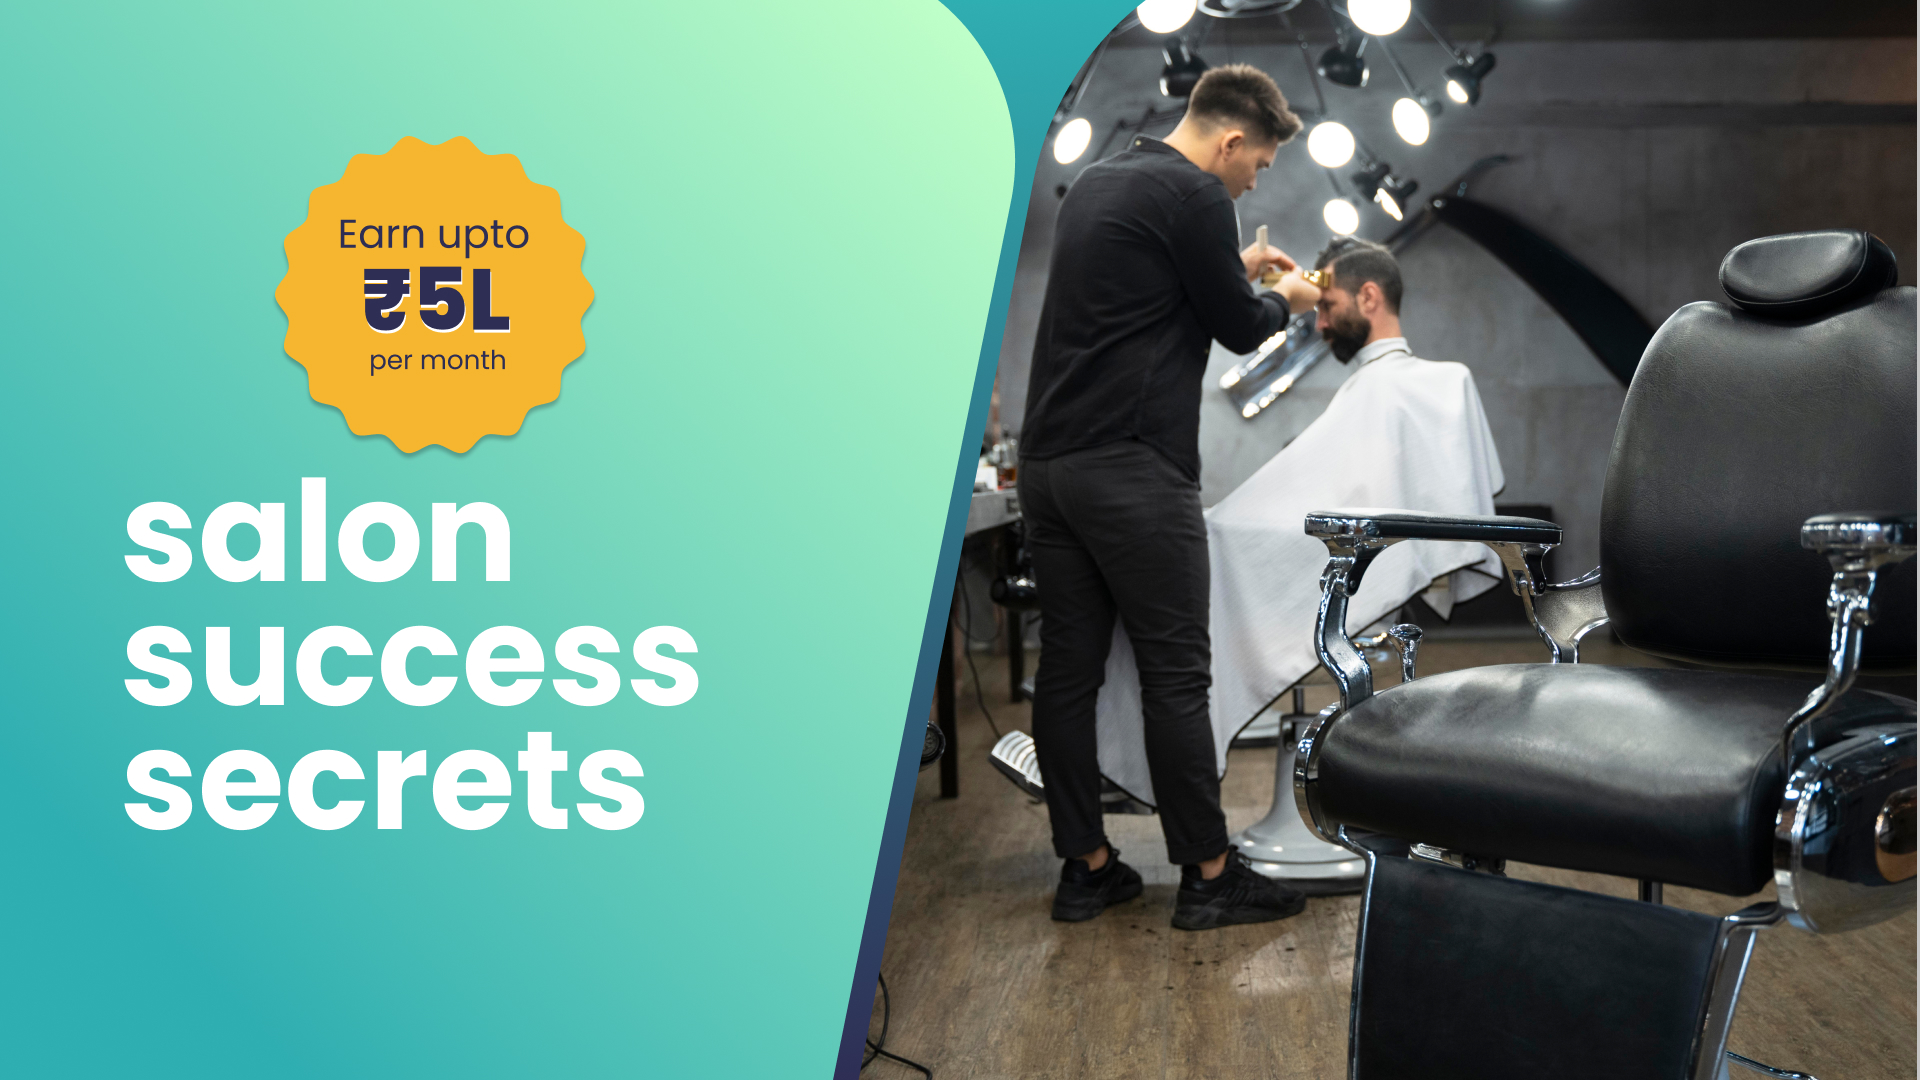 Course Trailer: Commercial Salon Business: Earn up to 5 lakh/month. Watch to know more.